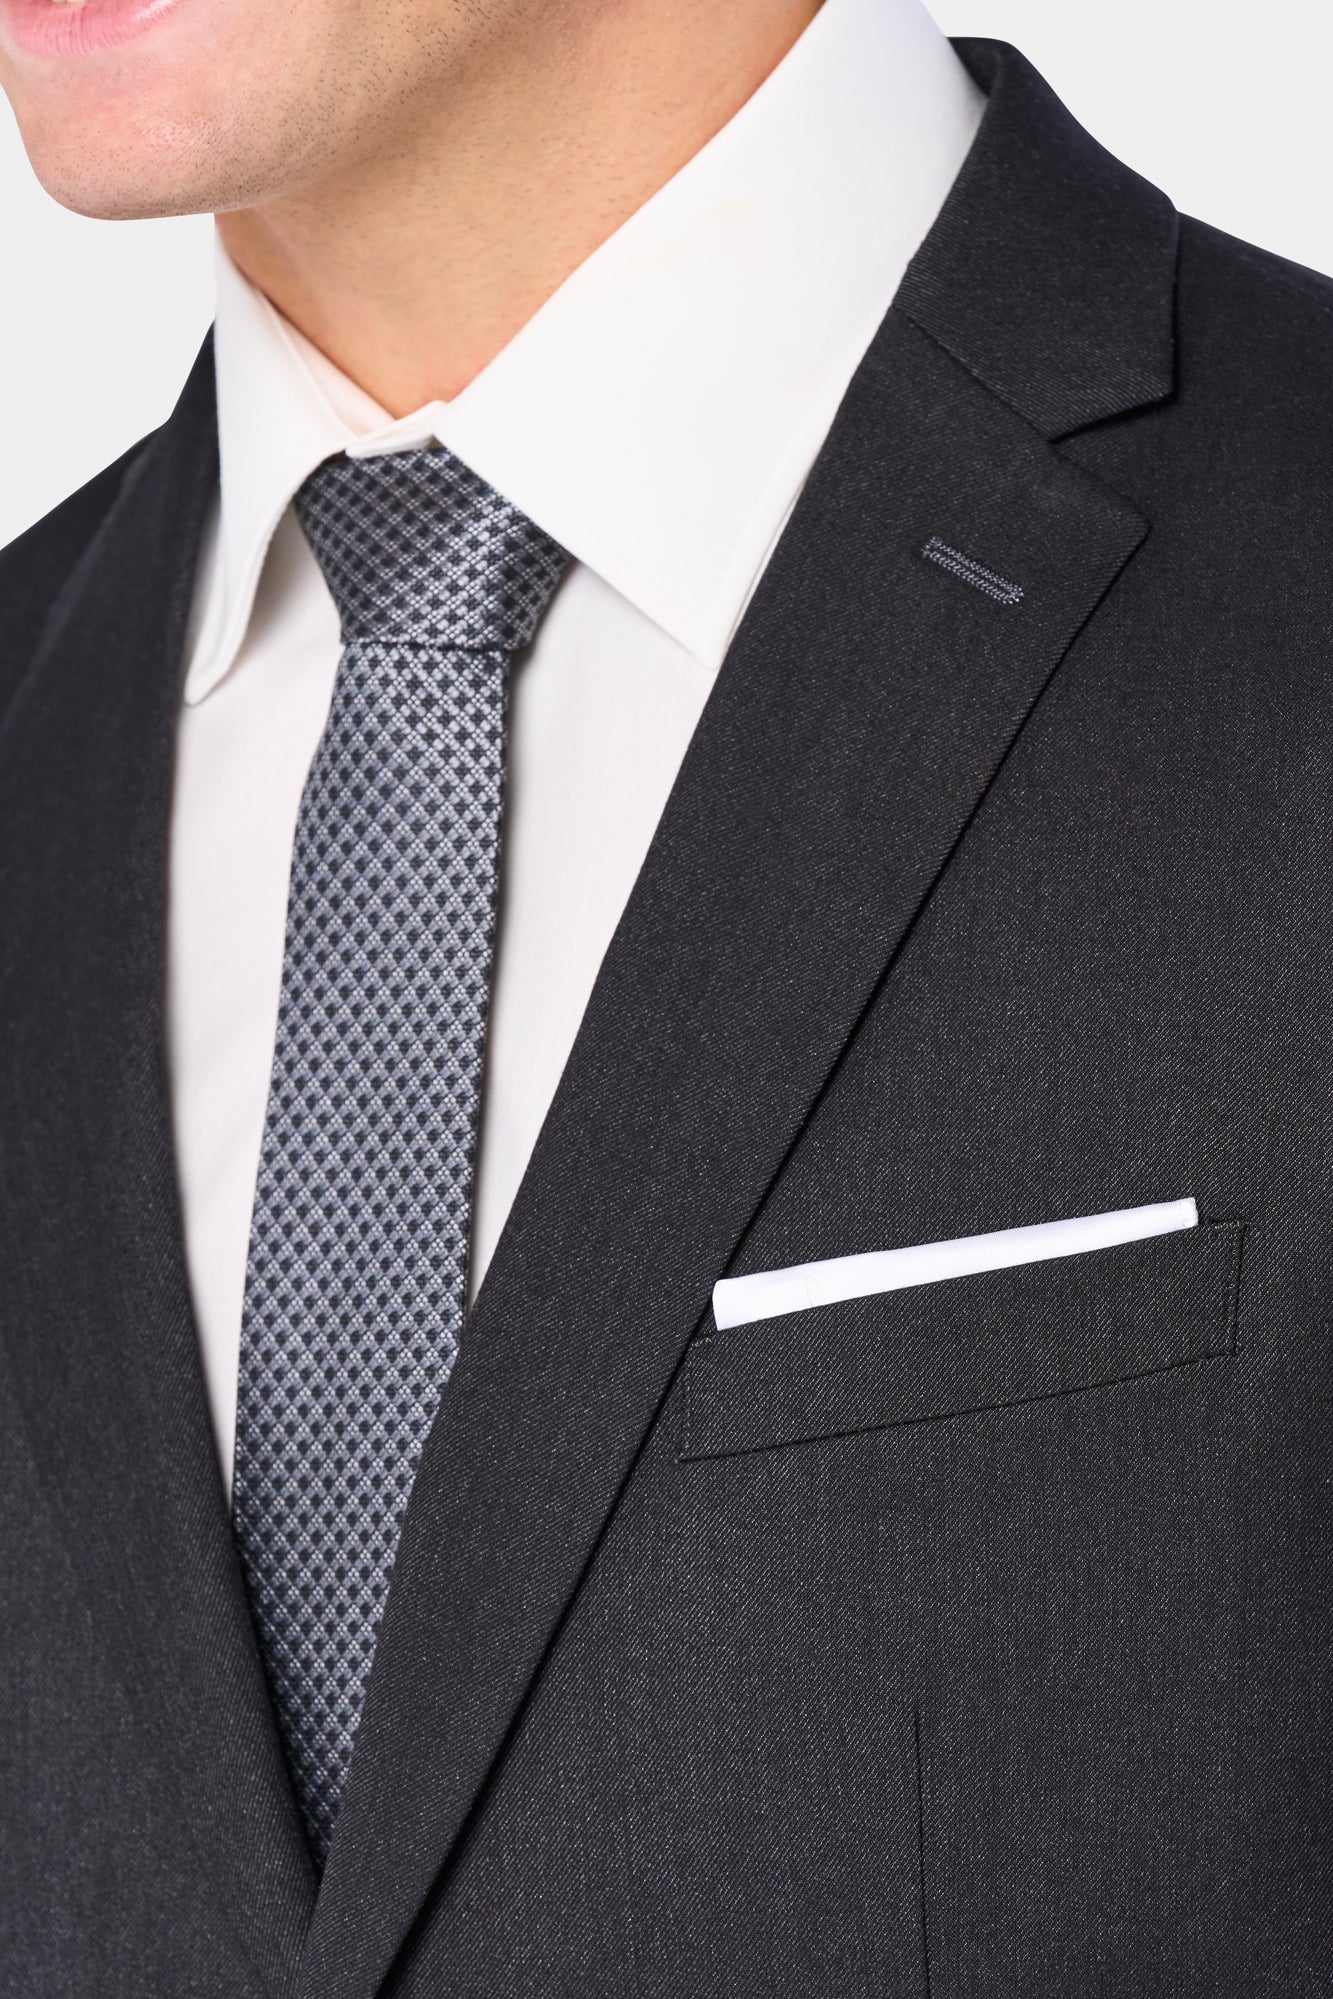 Everyday Men's Suits Starting At $199 - Mensuits.com – MenSuits